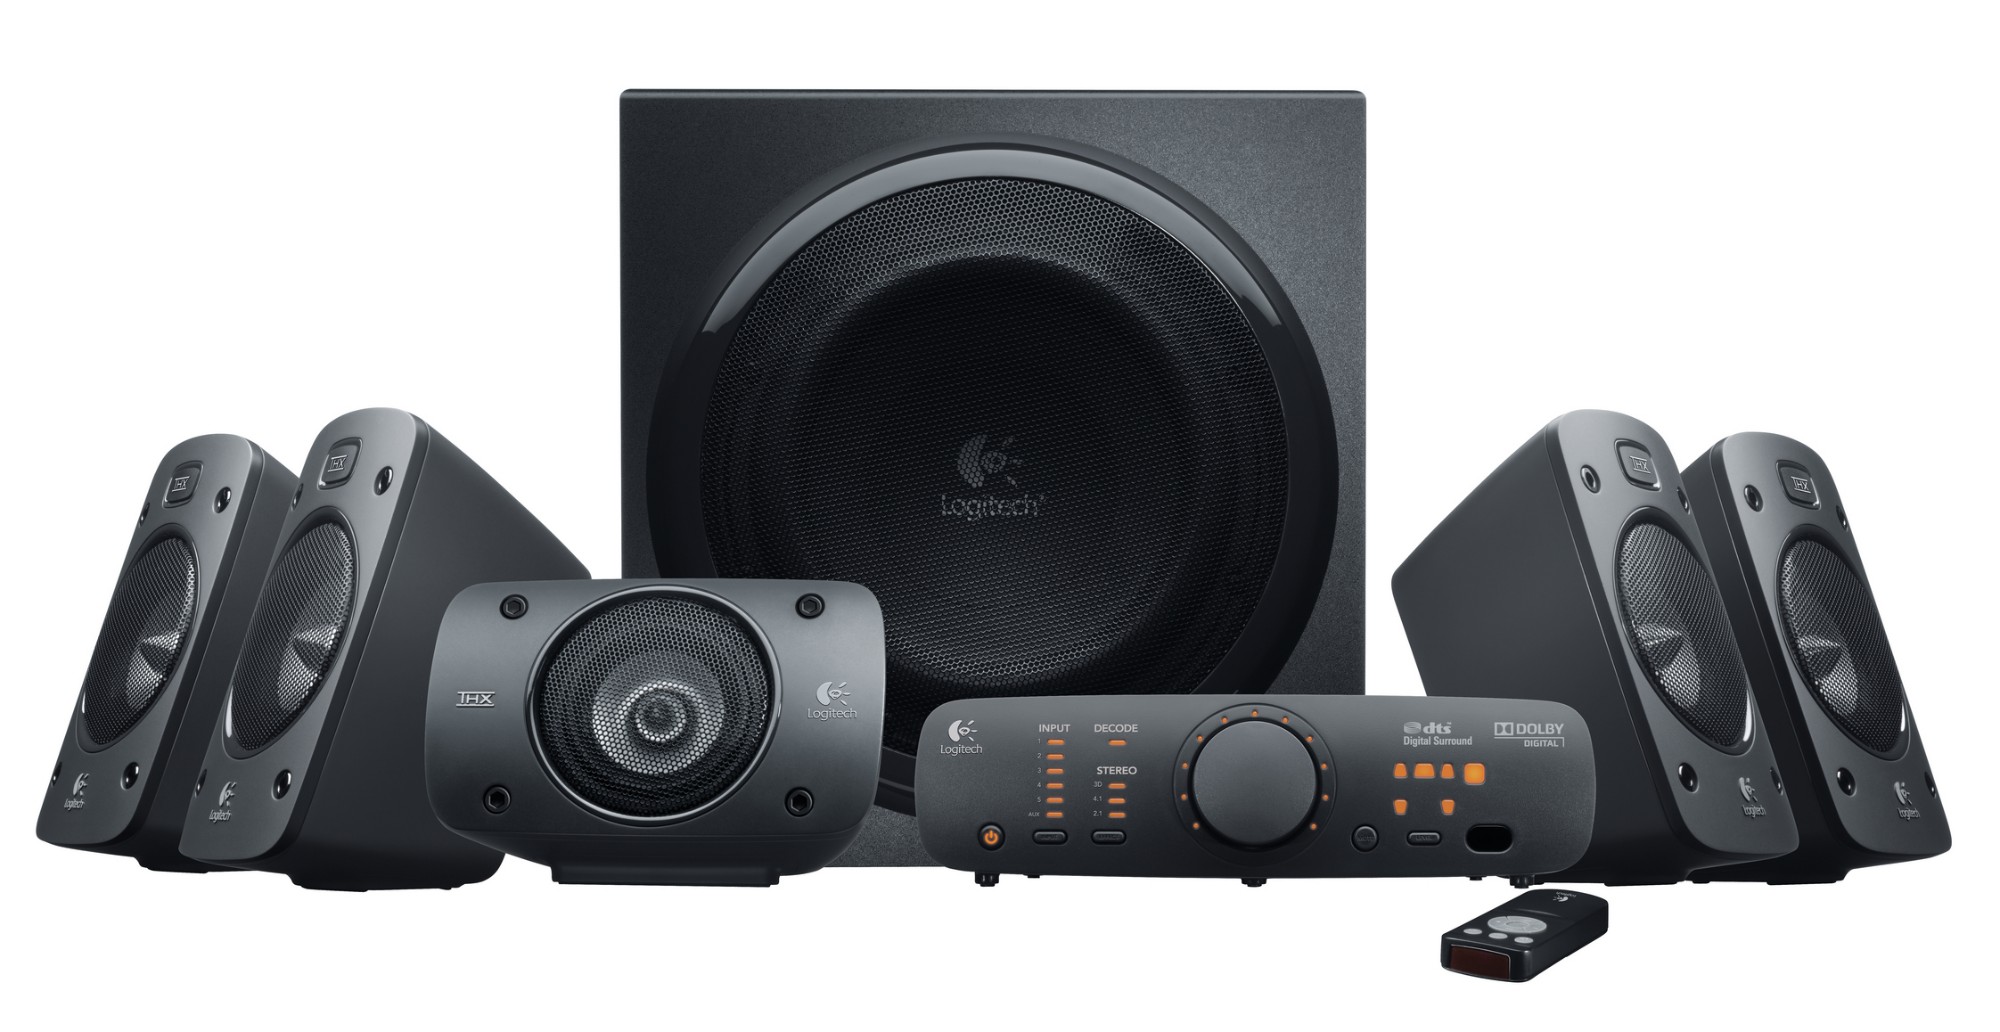 The office stack Round and round Logitech Surround Sound Speakers Z906 500 W Black 5.1 channels